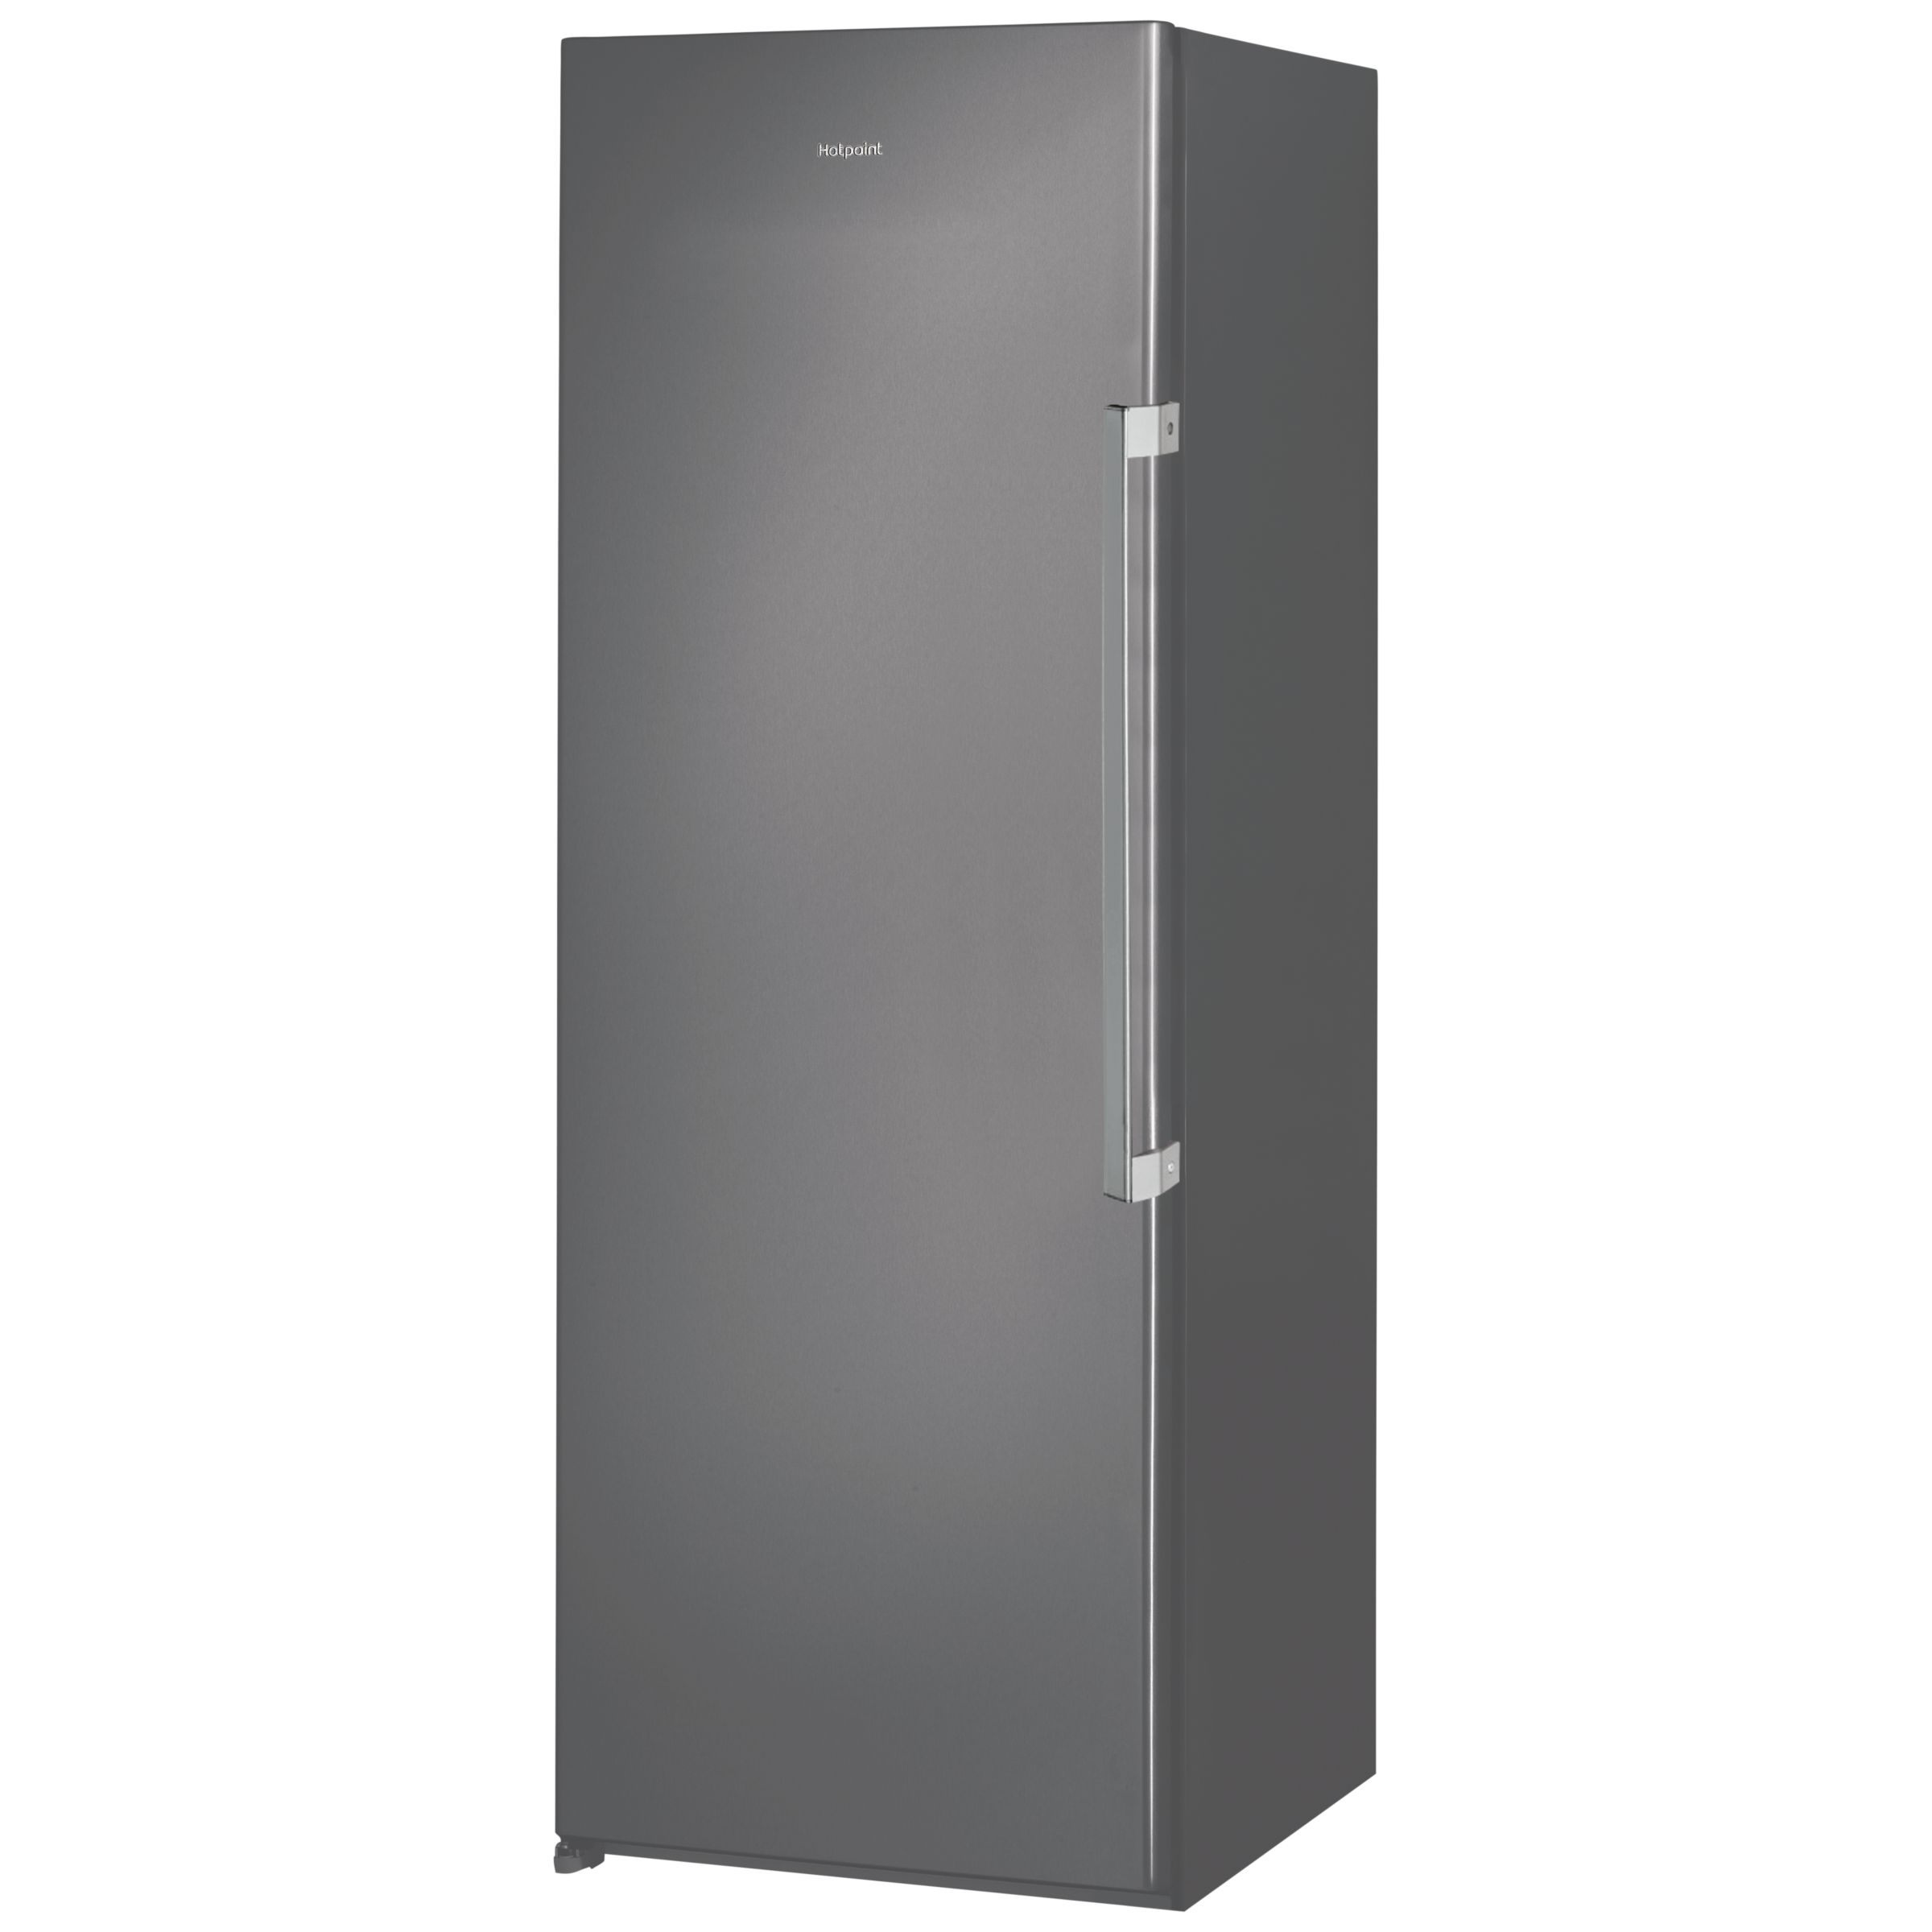 Hotpoint UH6F1CGUK.1 Freestanding Freezer, A+ Energy Rating, 59.5cm Wide, Graphite